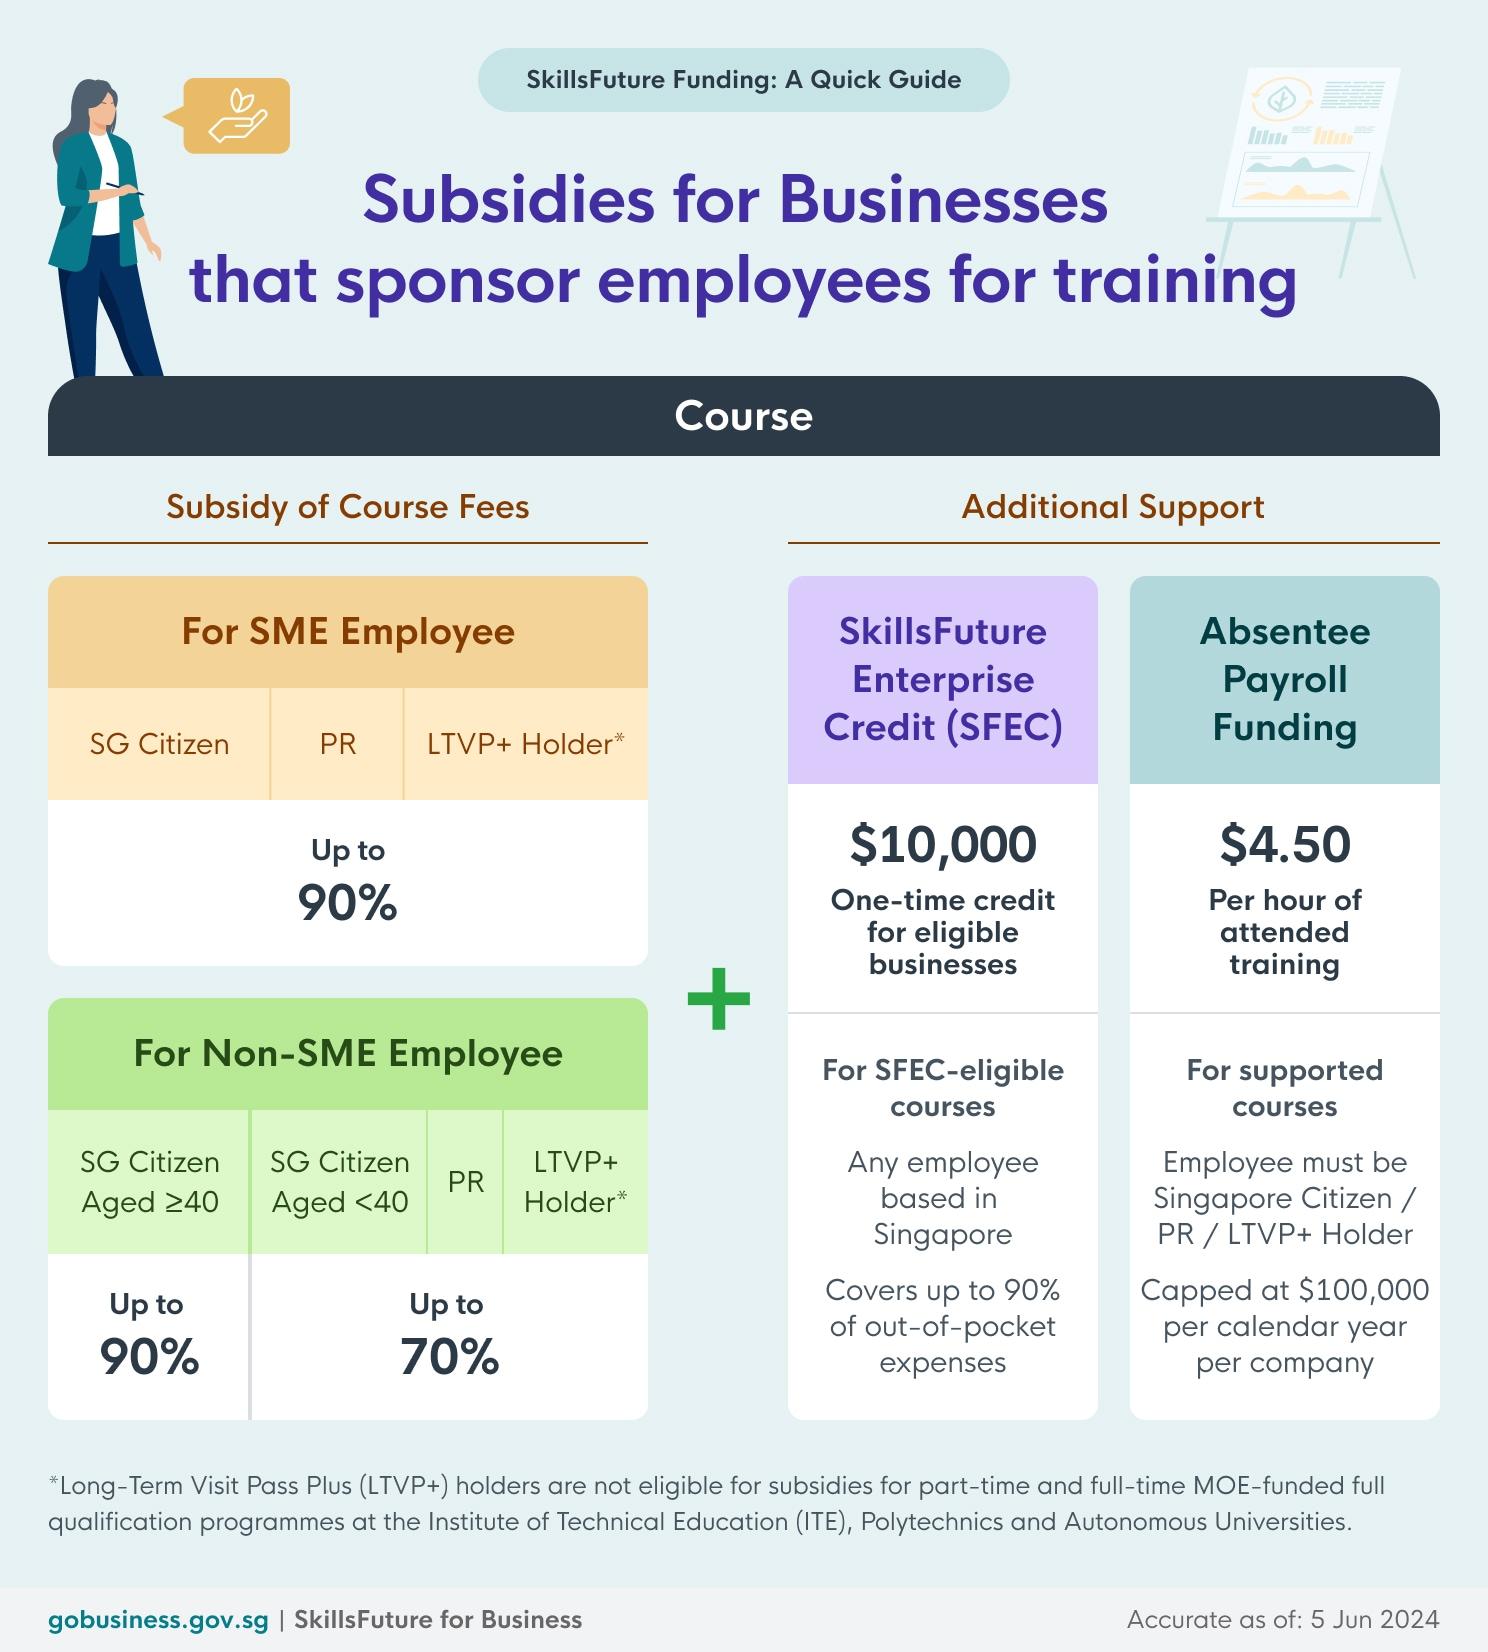 A summary of SkillsFuture subsidies for businesses that sponsor employees for training courses. Read details in the next section.